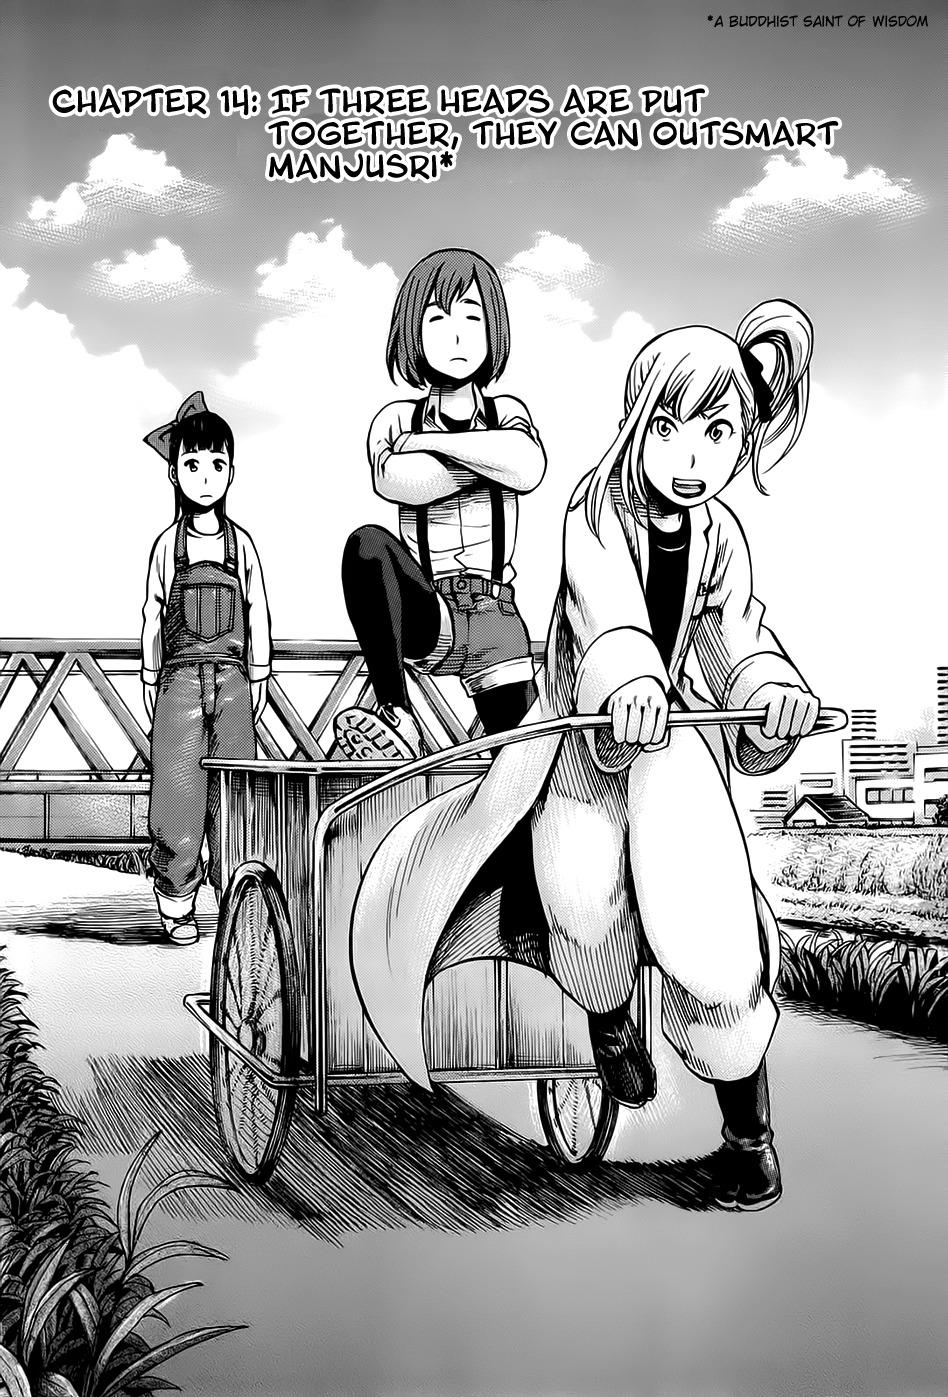 Hinamatsuri Vol.3-Chapter.14-If-Three-Heads-Are-Put-Together,-They-Can-Outsmart-Manjusri Image